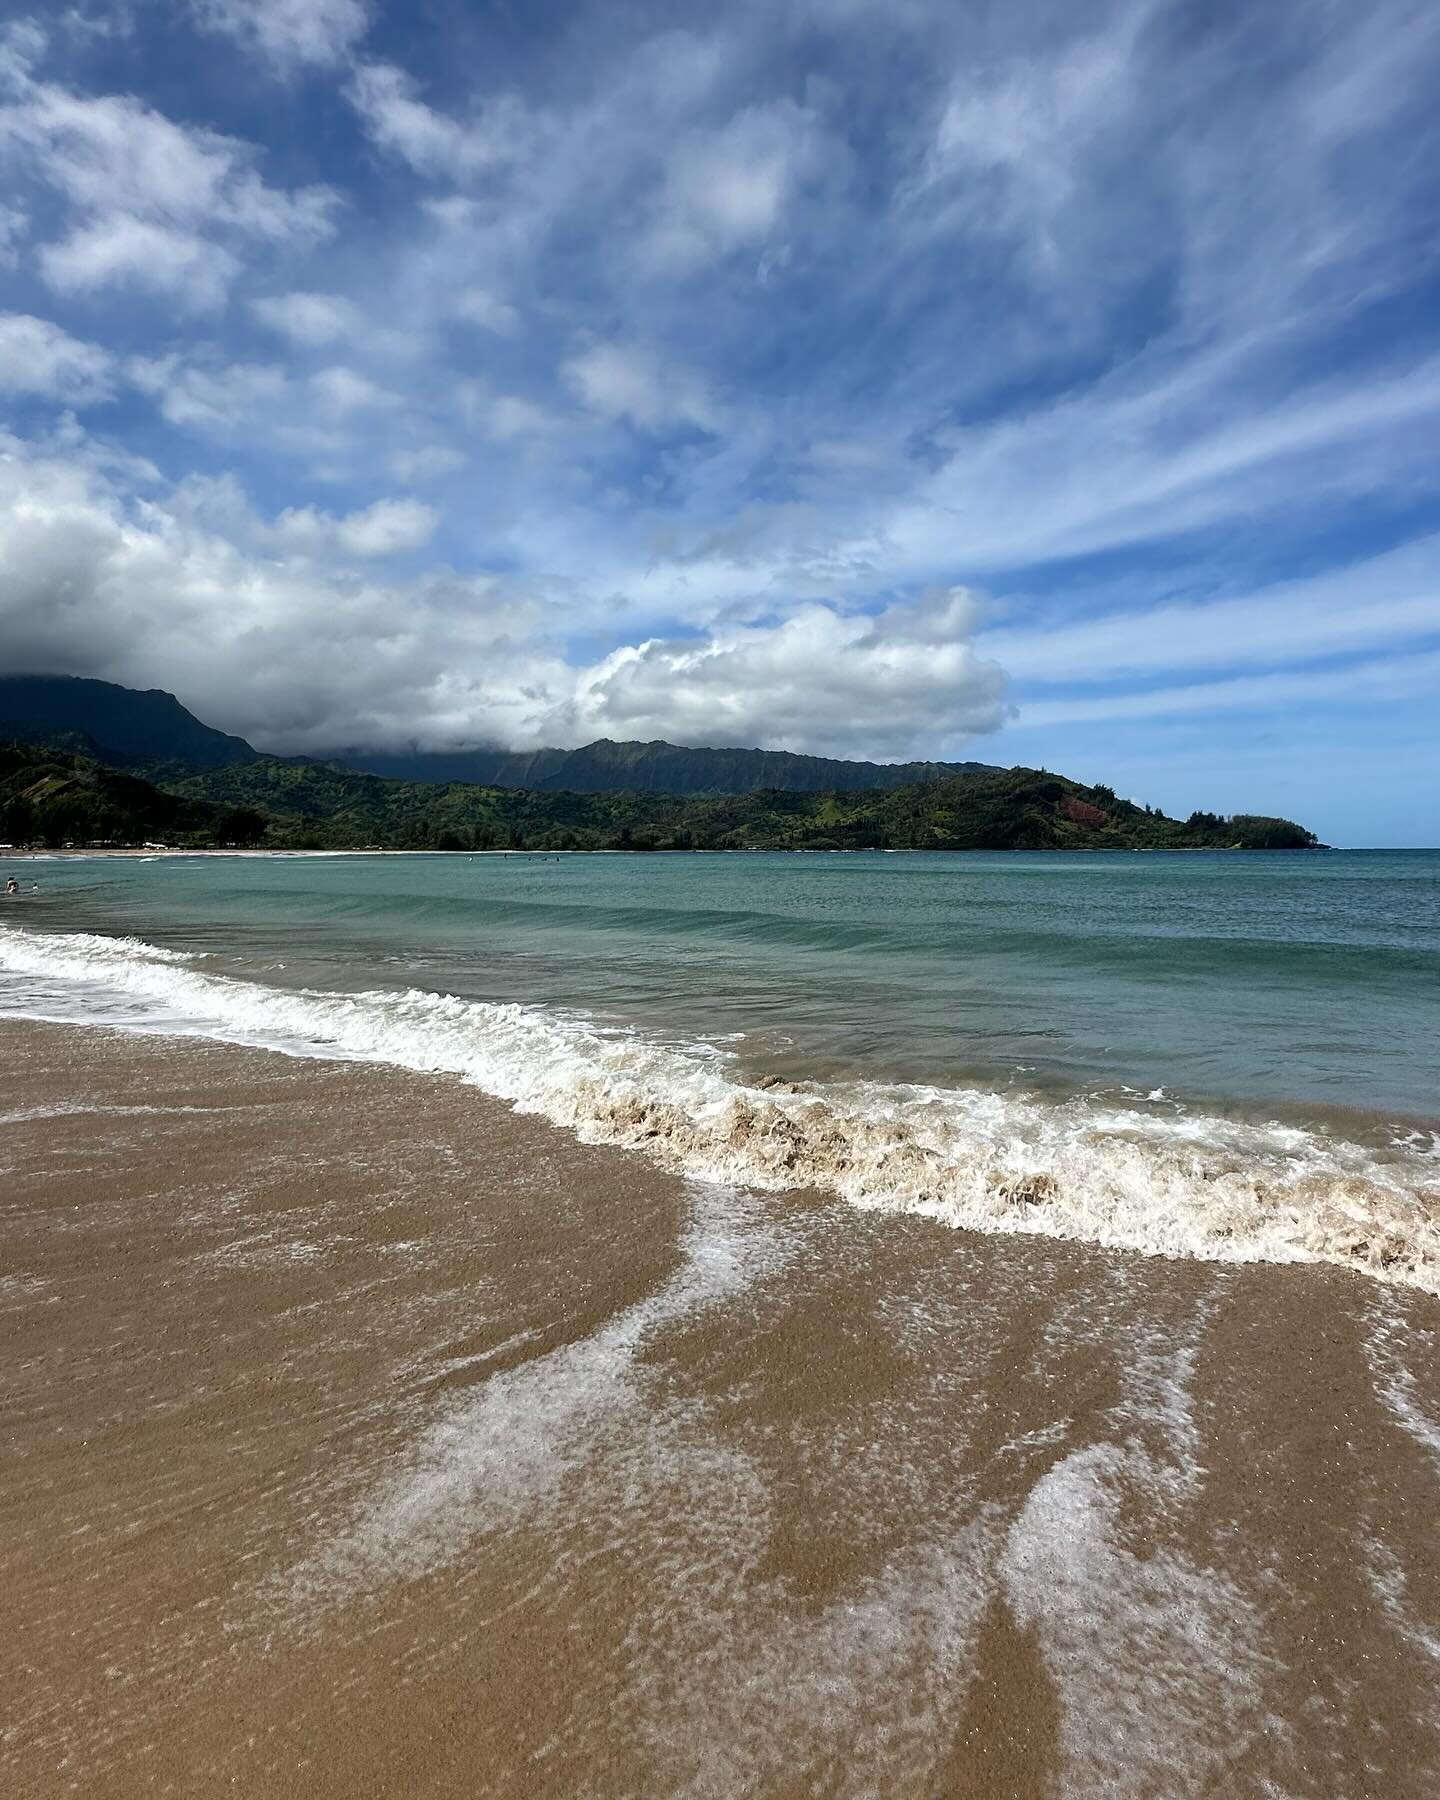 Hawaii with mom for sister's birthday 🏝️

We walked Hanalei Bay and kayaked through the Hanalei National Wildlife Refuge, hiked part of Waimea Canyon State Park and got a peek down the Kalalau Valley along the Nāpali Coast, hit the beach in Kapa'a, 